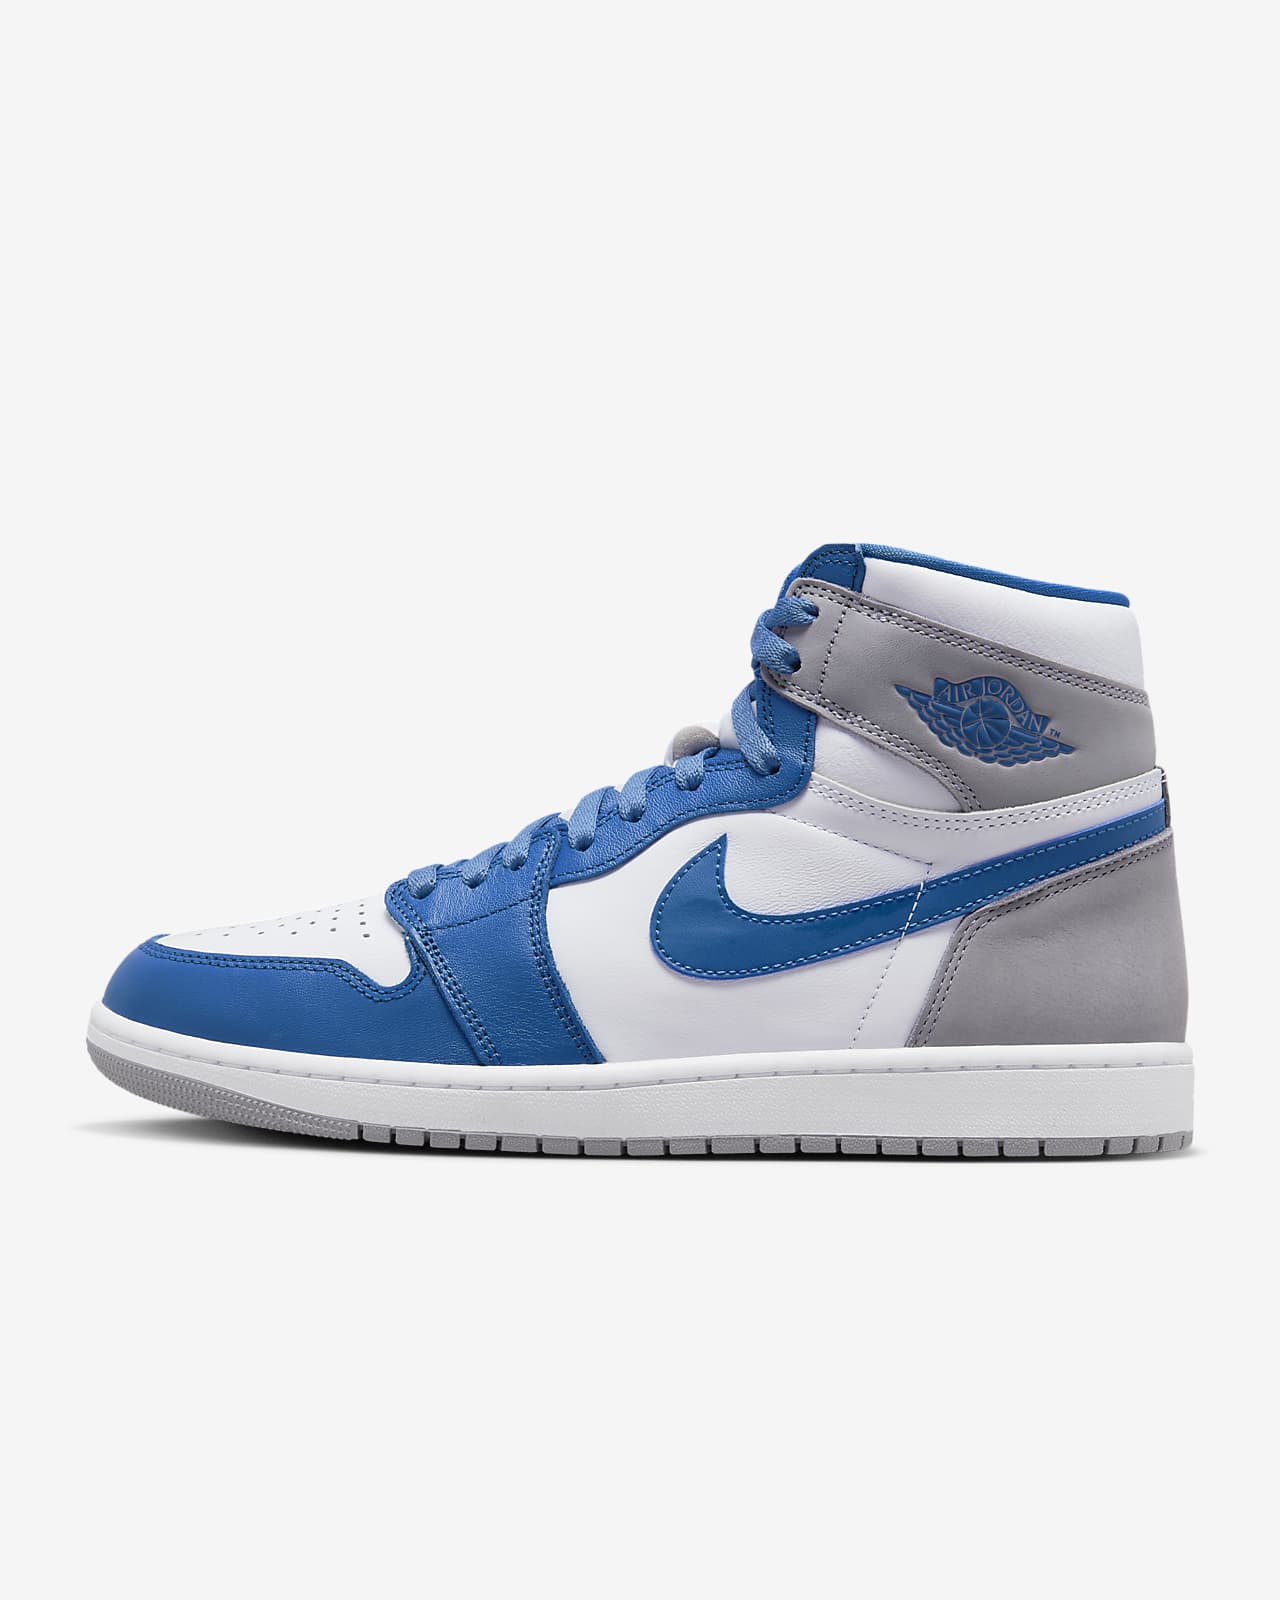 Meal seriously To give permission Air Jordan 1 Retro High OG Men's Shoes. Nike.com